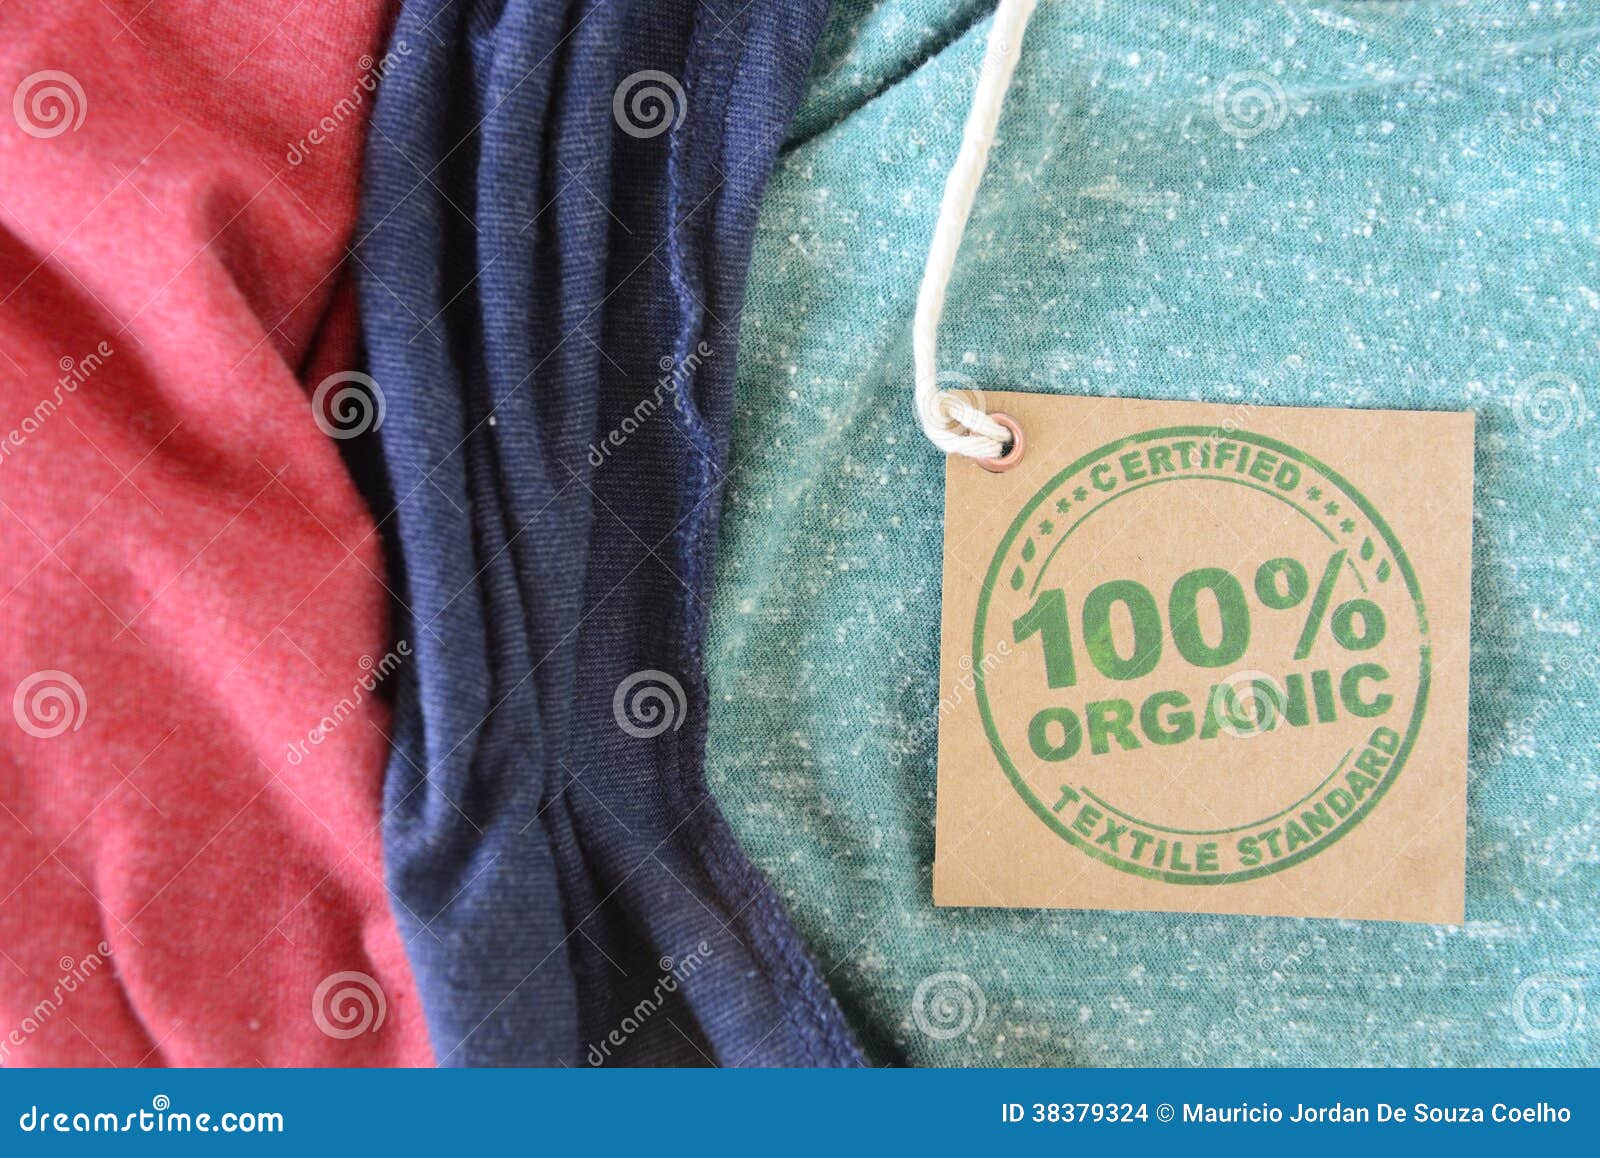 garment with certified organic fabric label.